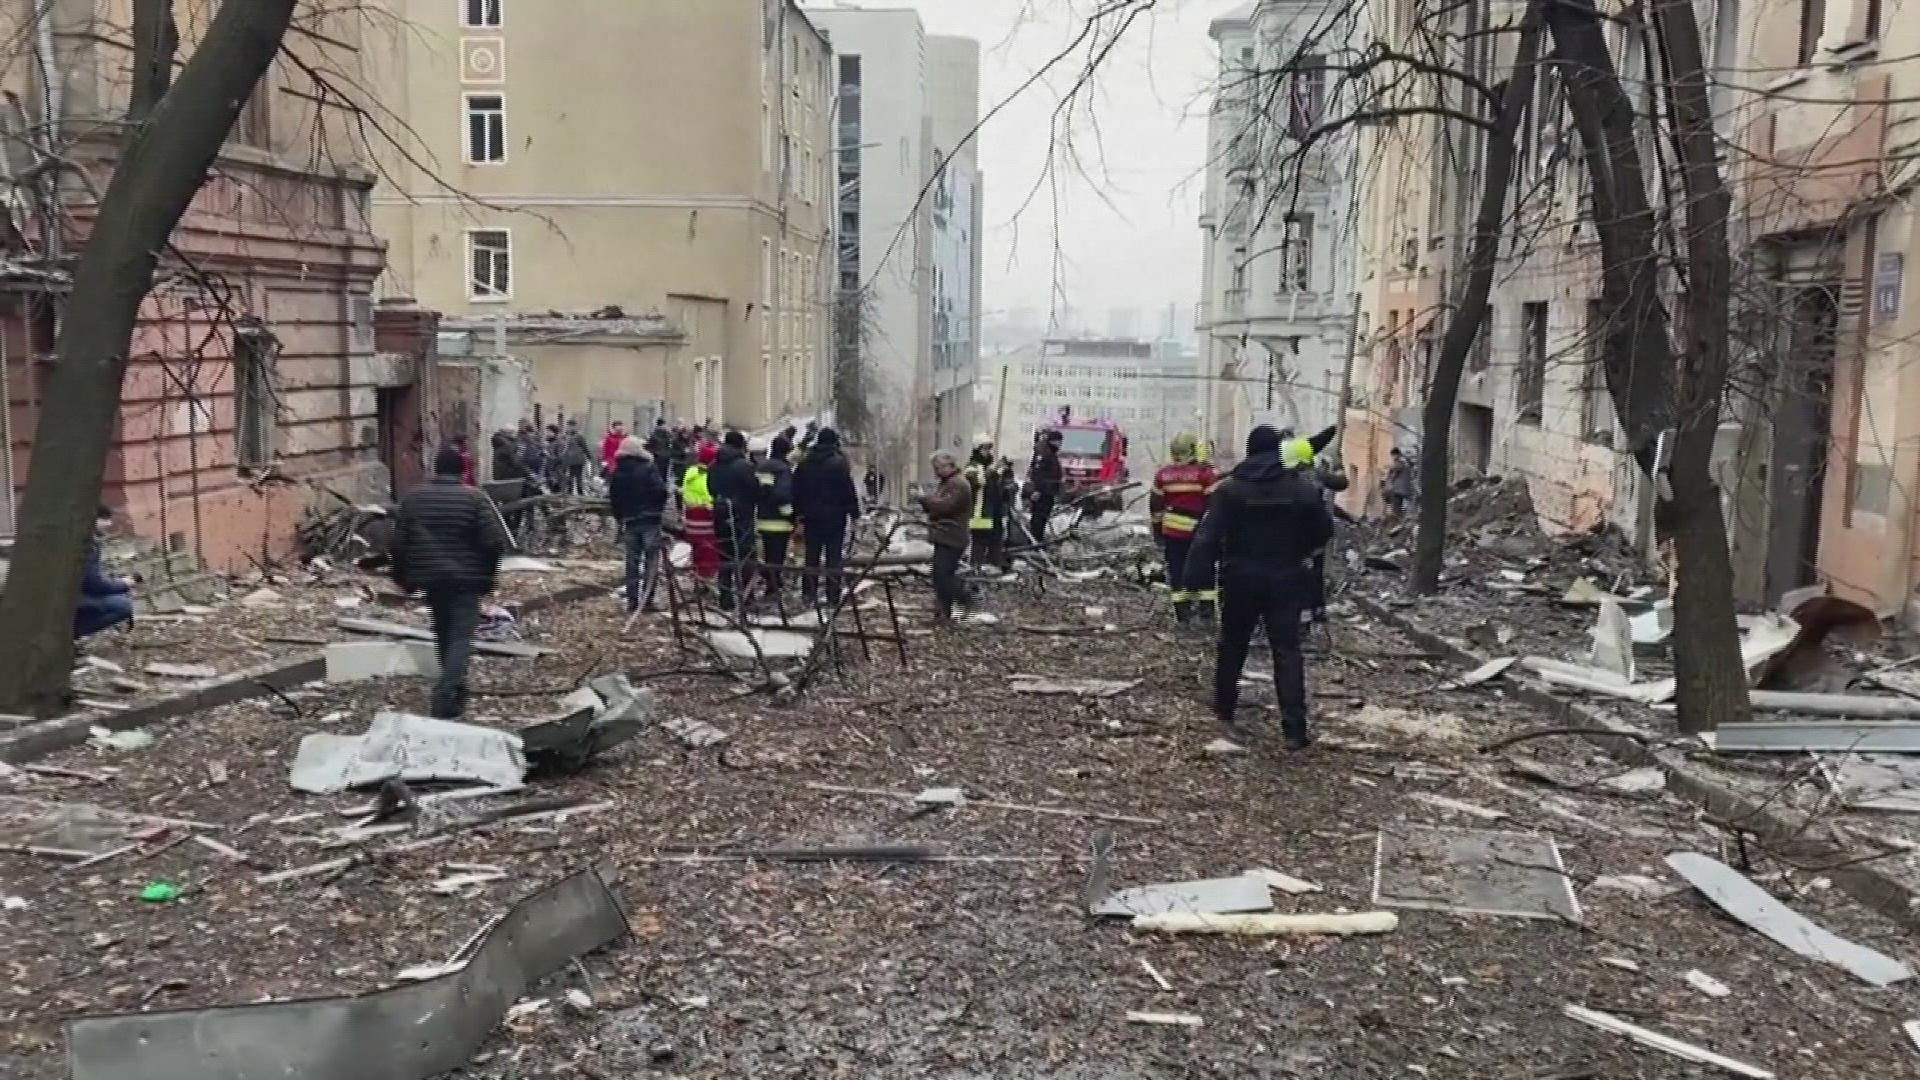 At least five people were injured in Russian rocket attacks Sunday in the center of Kharkiv, Ukraine's second-largest city, officials said.